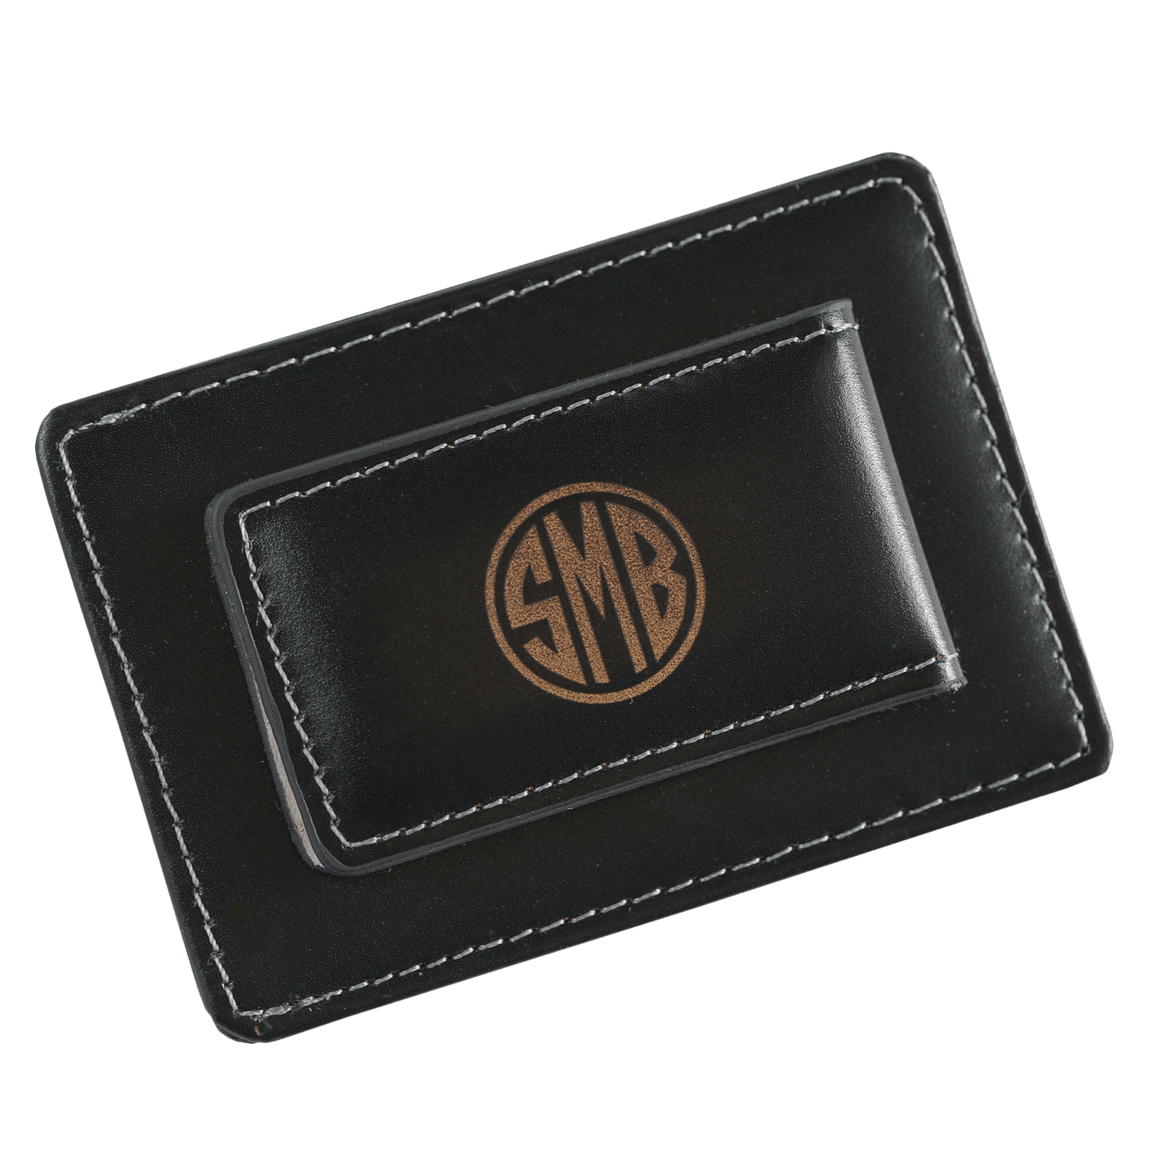 The Personal Exchange Monogram Tray Valet Jewelry Caddy (Black with Gold)